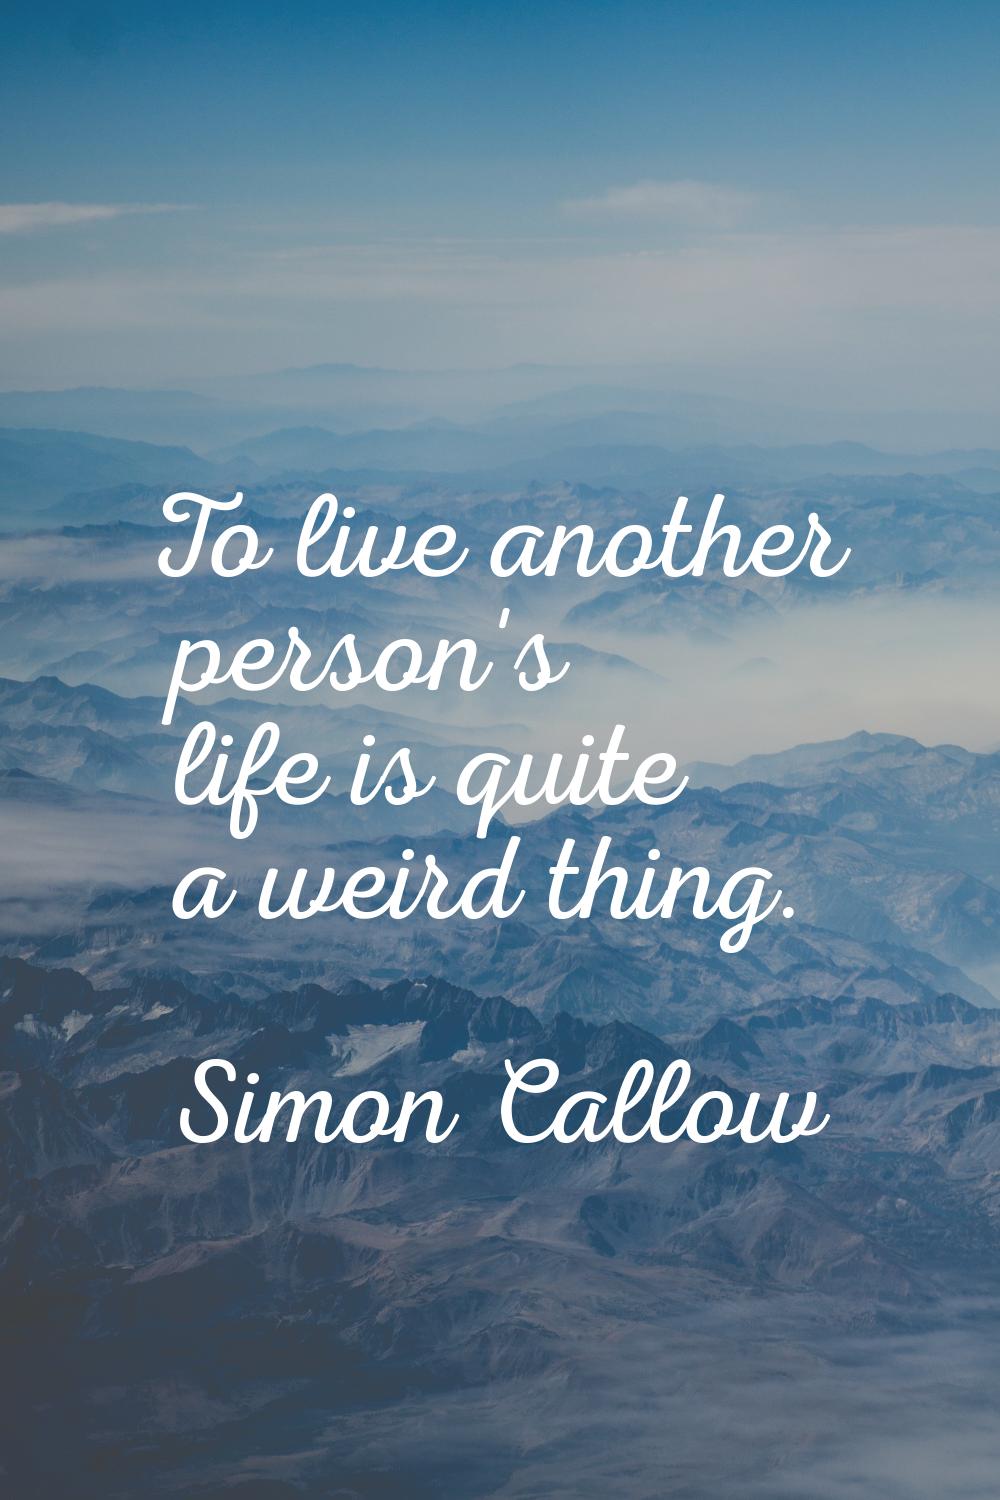 To live another person's life is quite a weird thing.